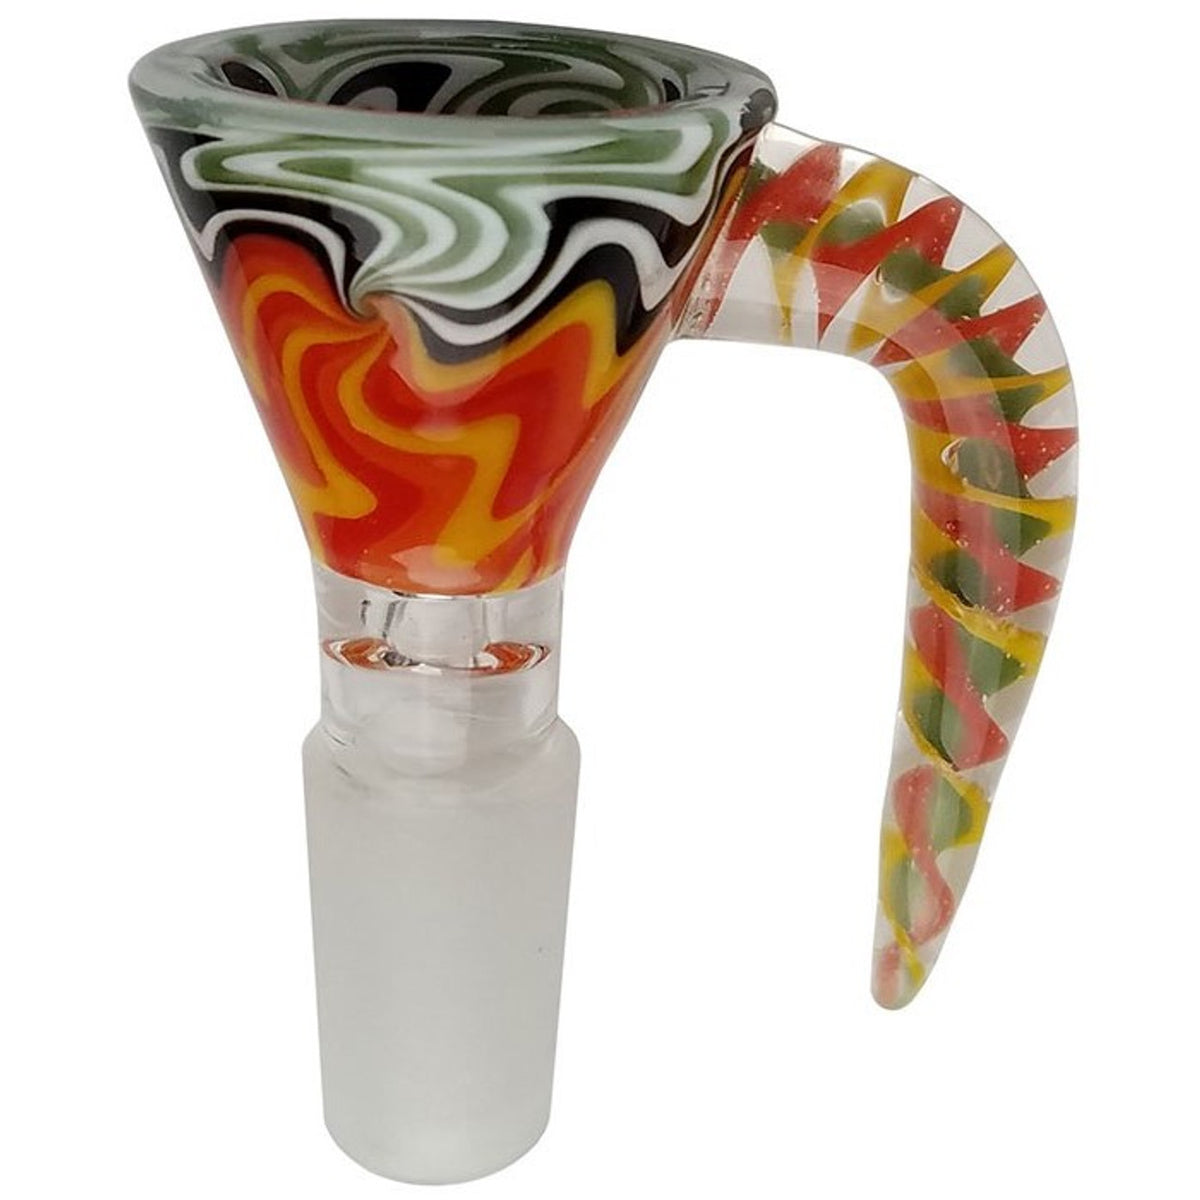 Wig Wag Bong Bowl - 14mm Male